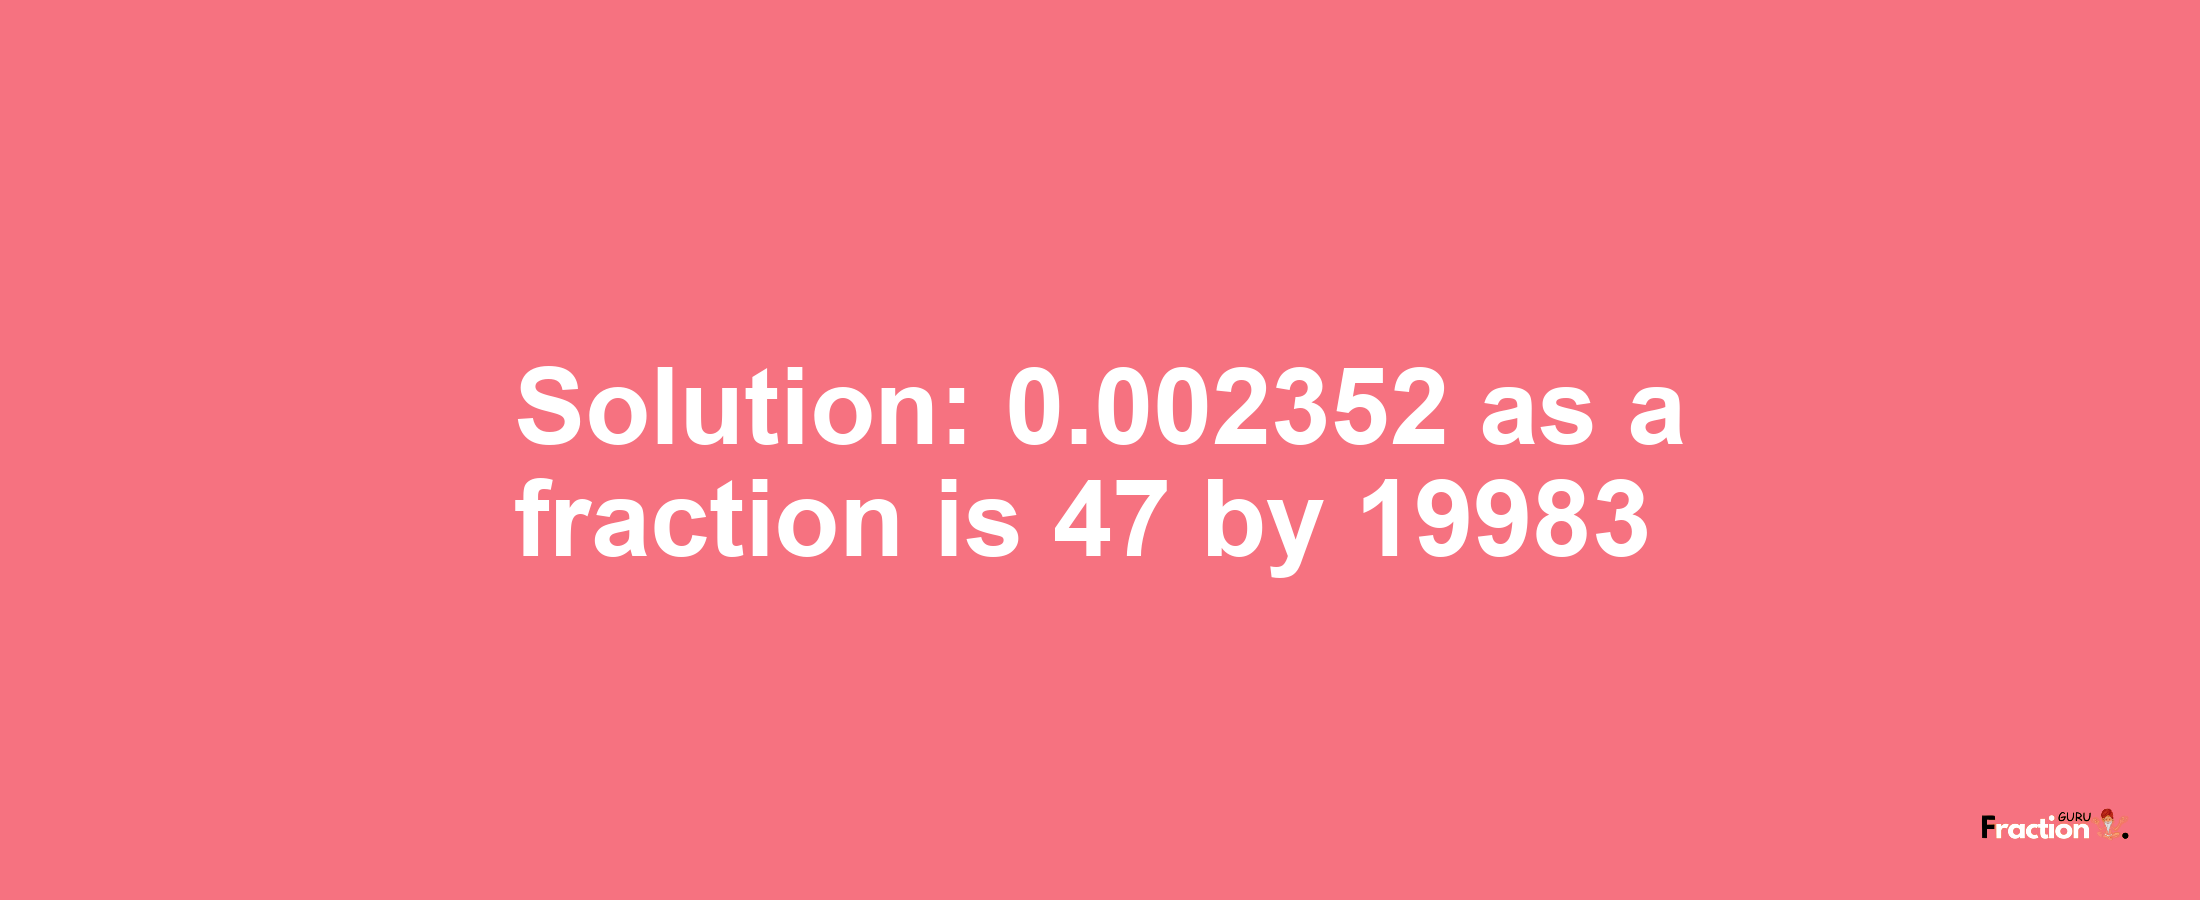 Solution:0.002352 as a fraction is 47/19983